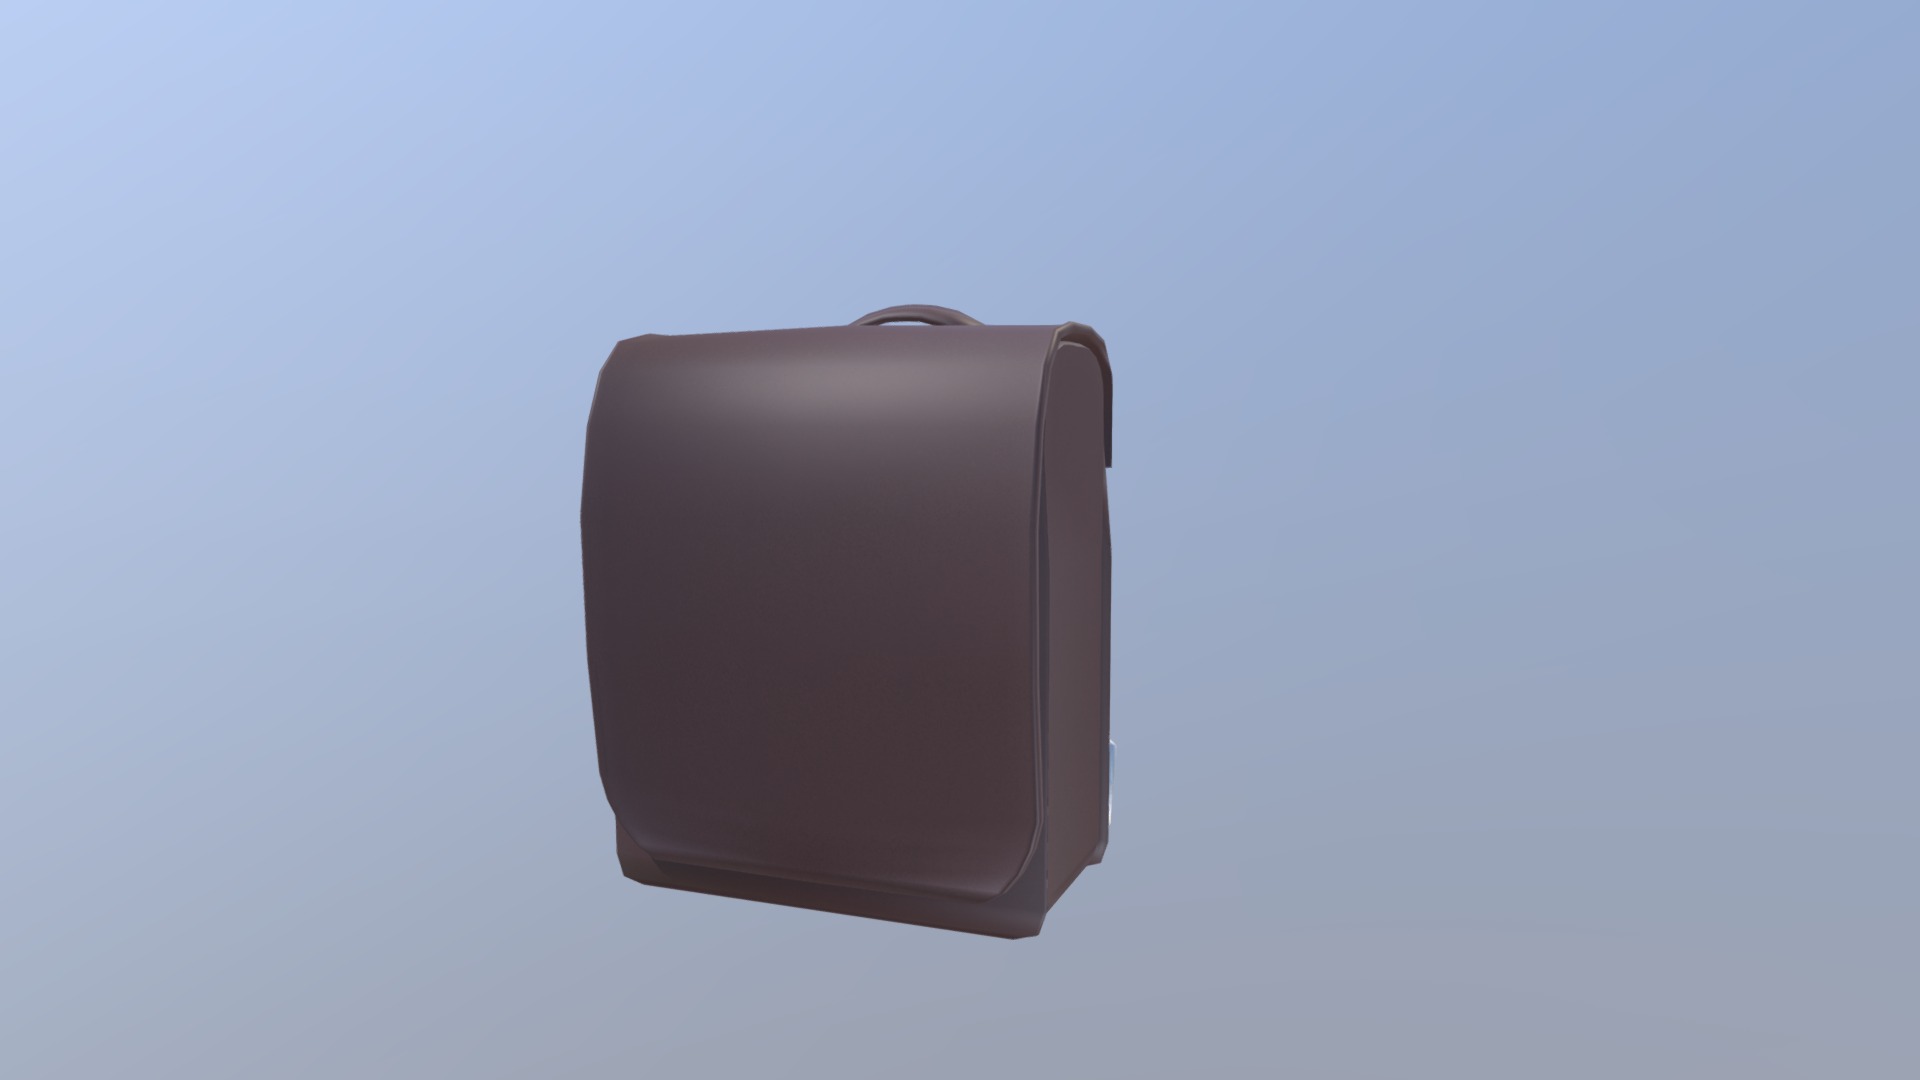 3D model Japanese bag - This is a 3D model of the Japanese bag. The 3D model is about a black rectangular object.